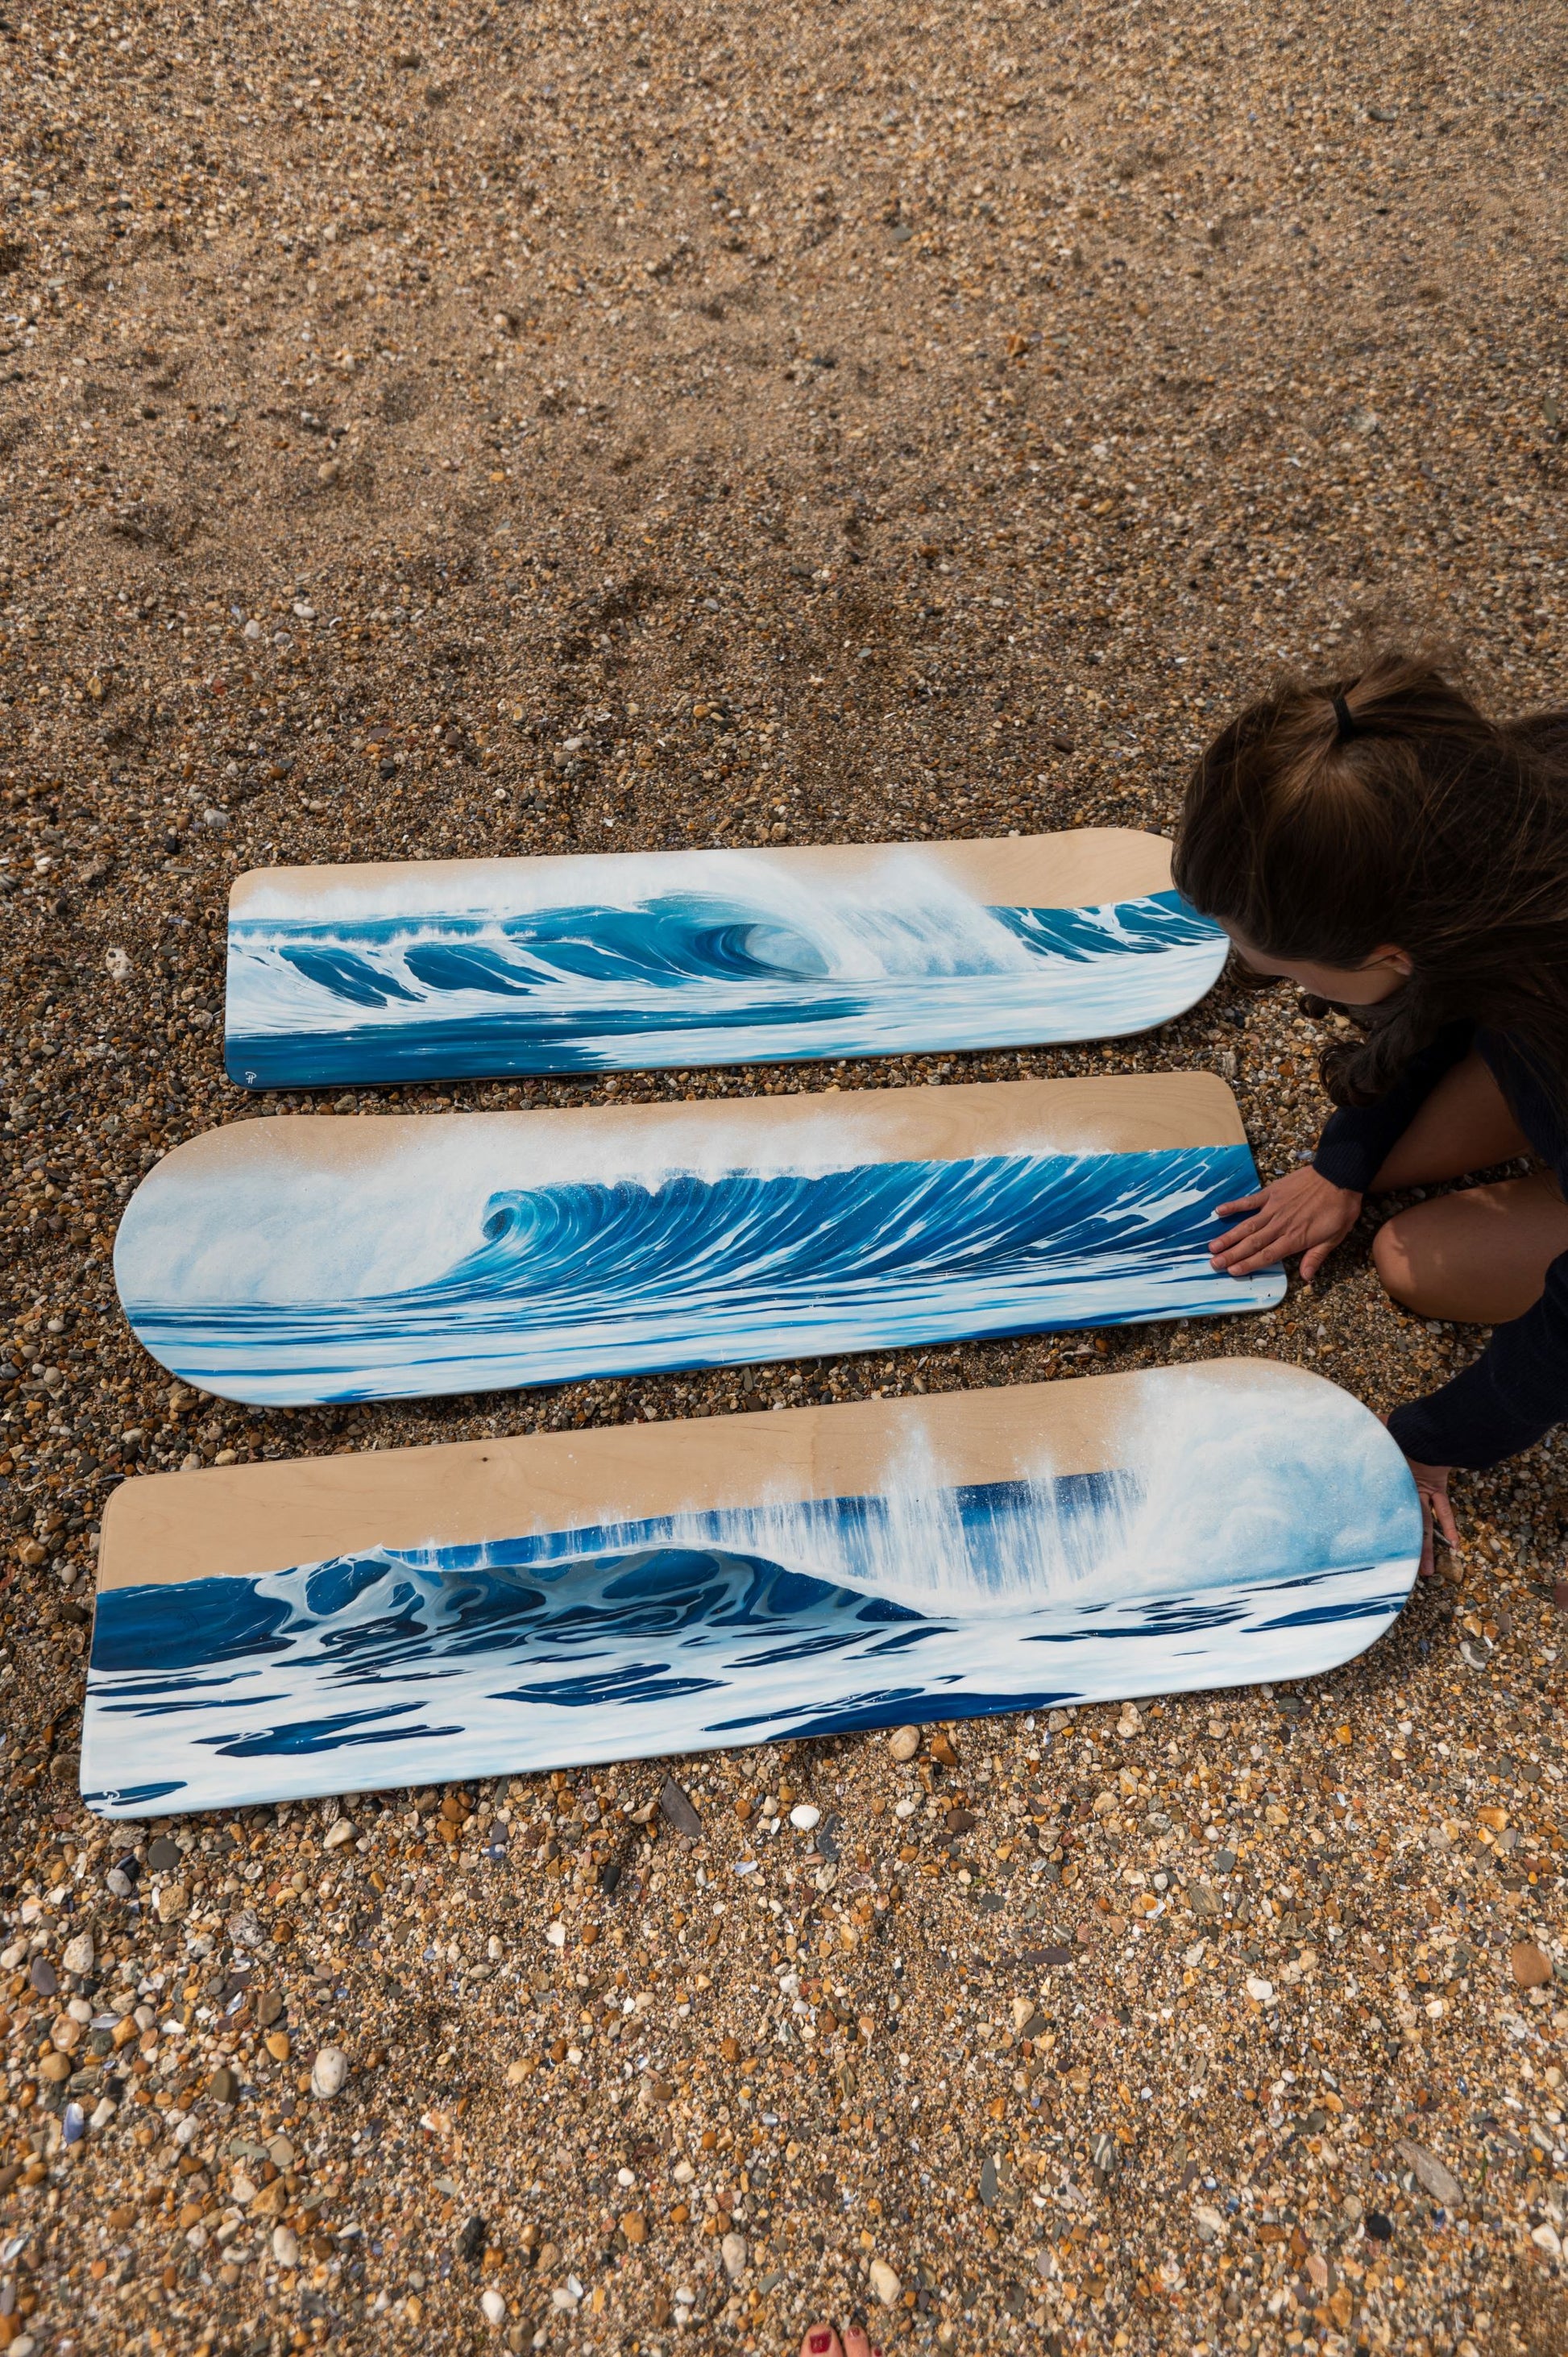 Oil painting on wooden bellyboard of waves inspired by Cornwall